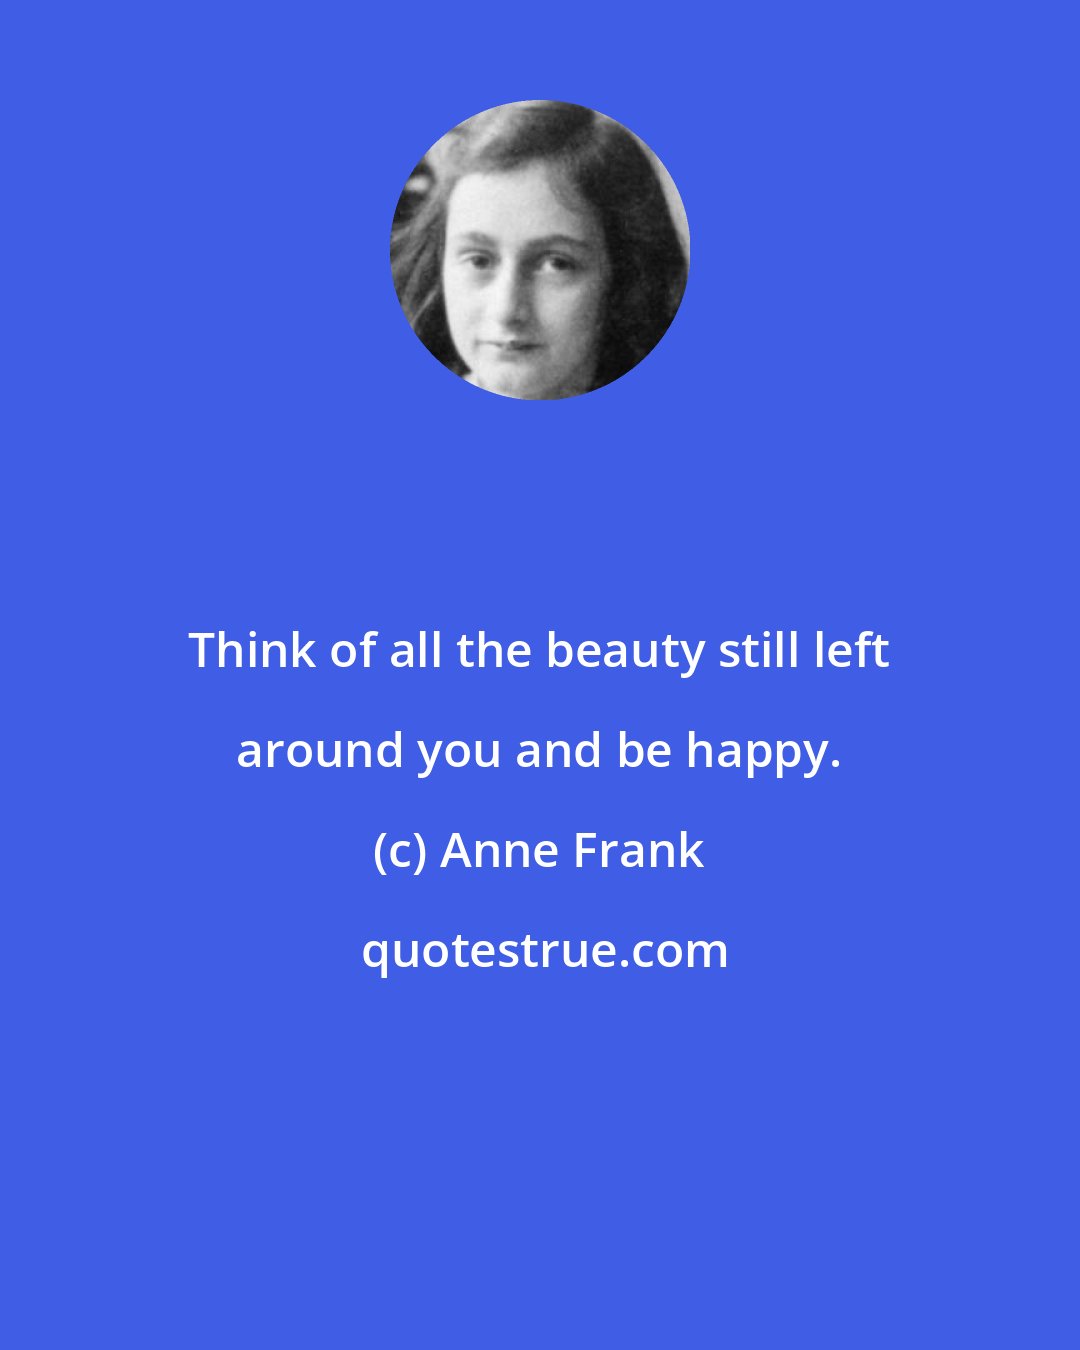 Anne Frank: Think of all the beauty still left around you and be happy.